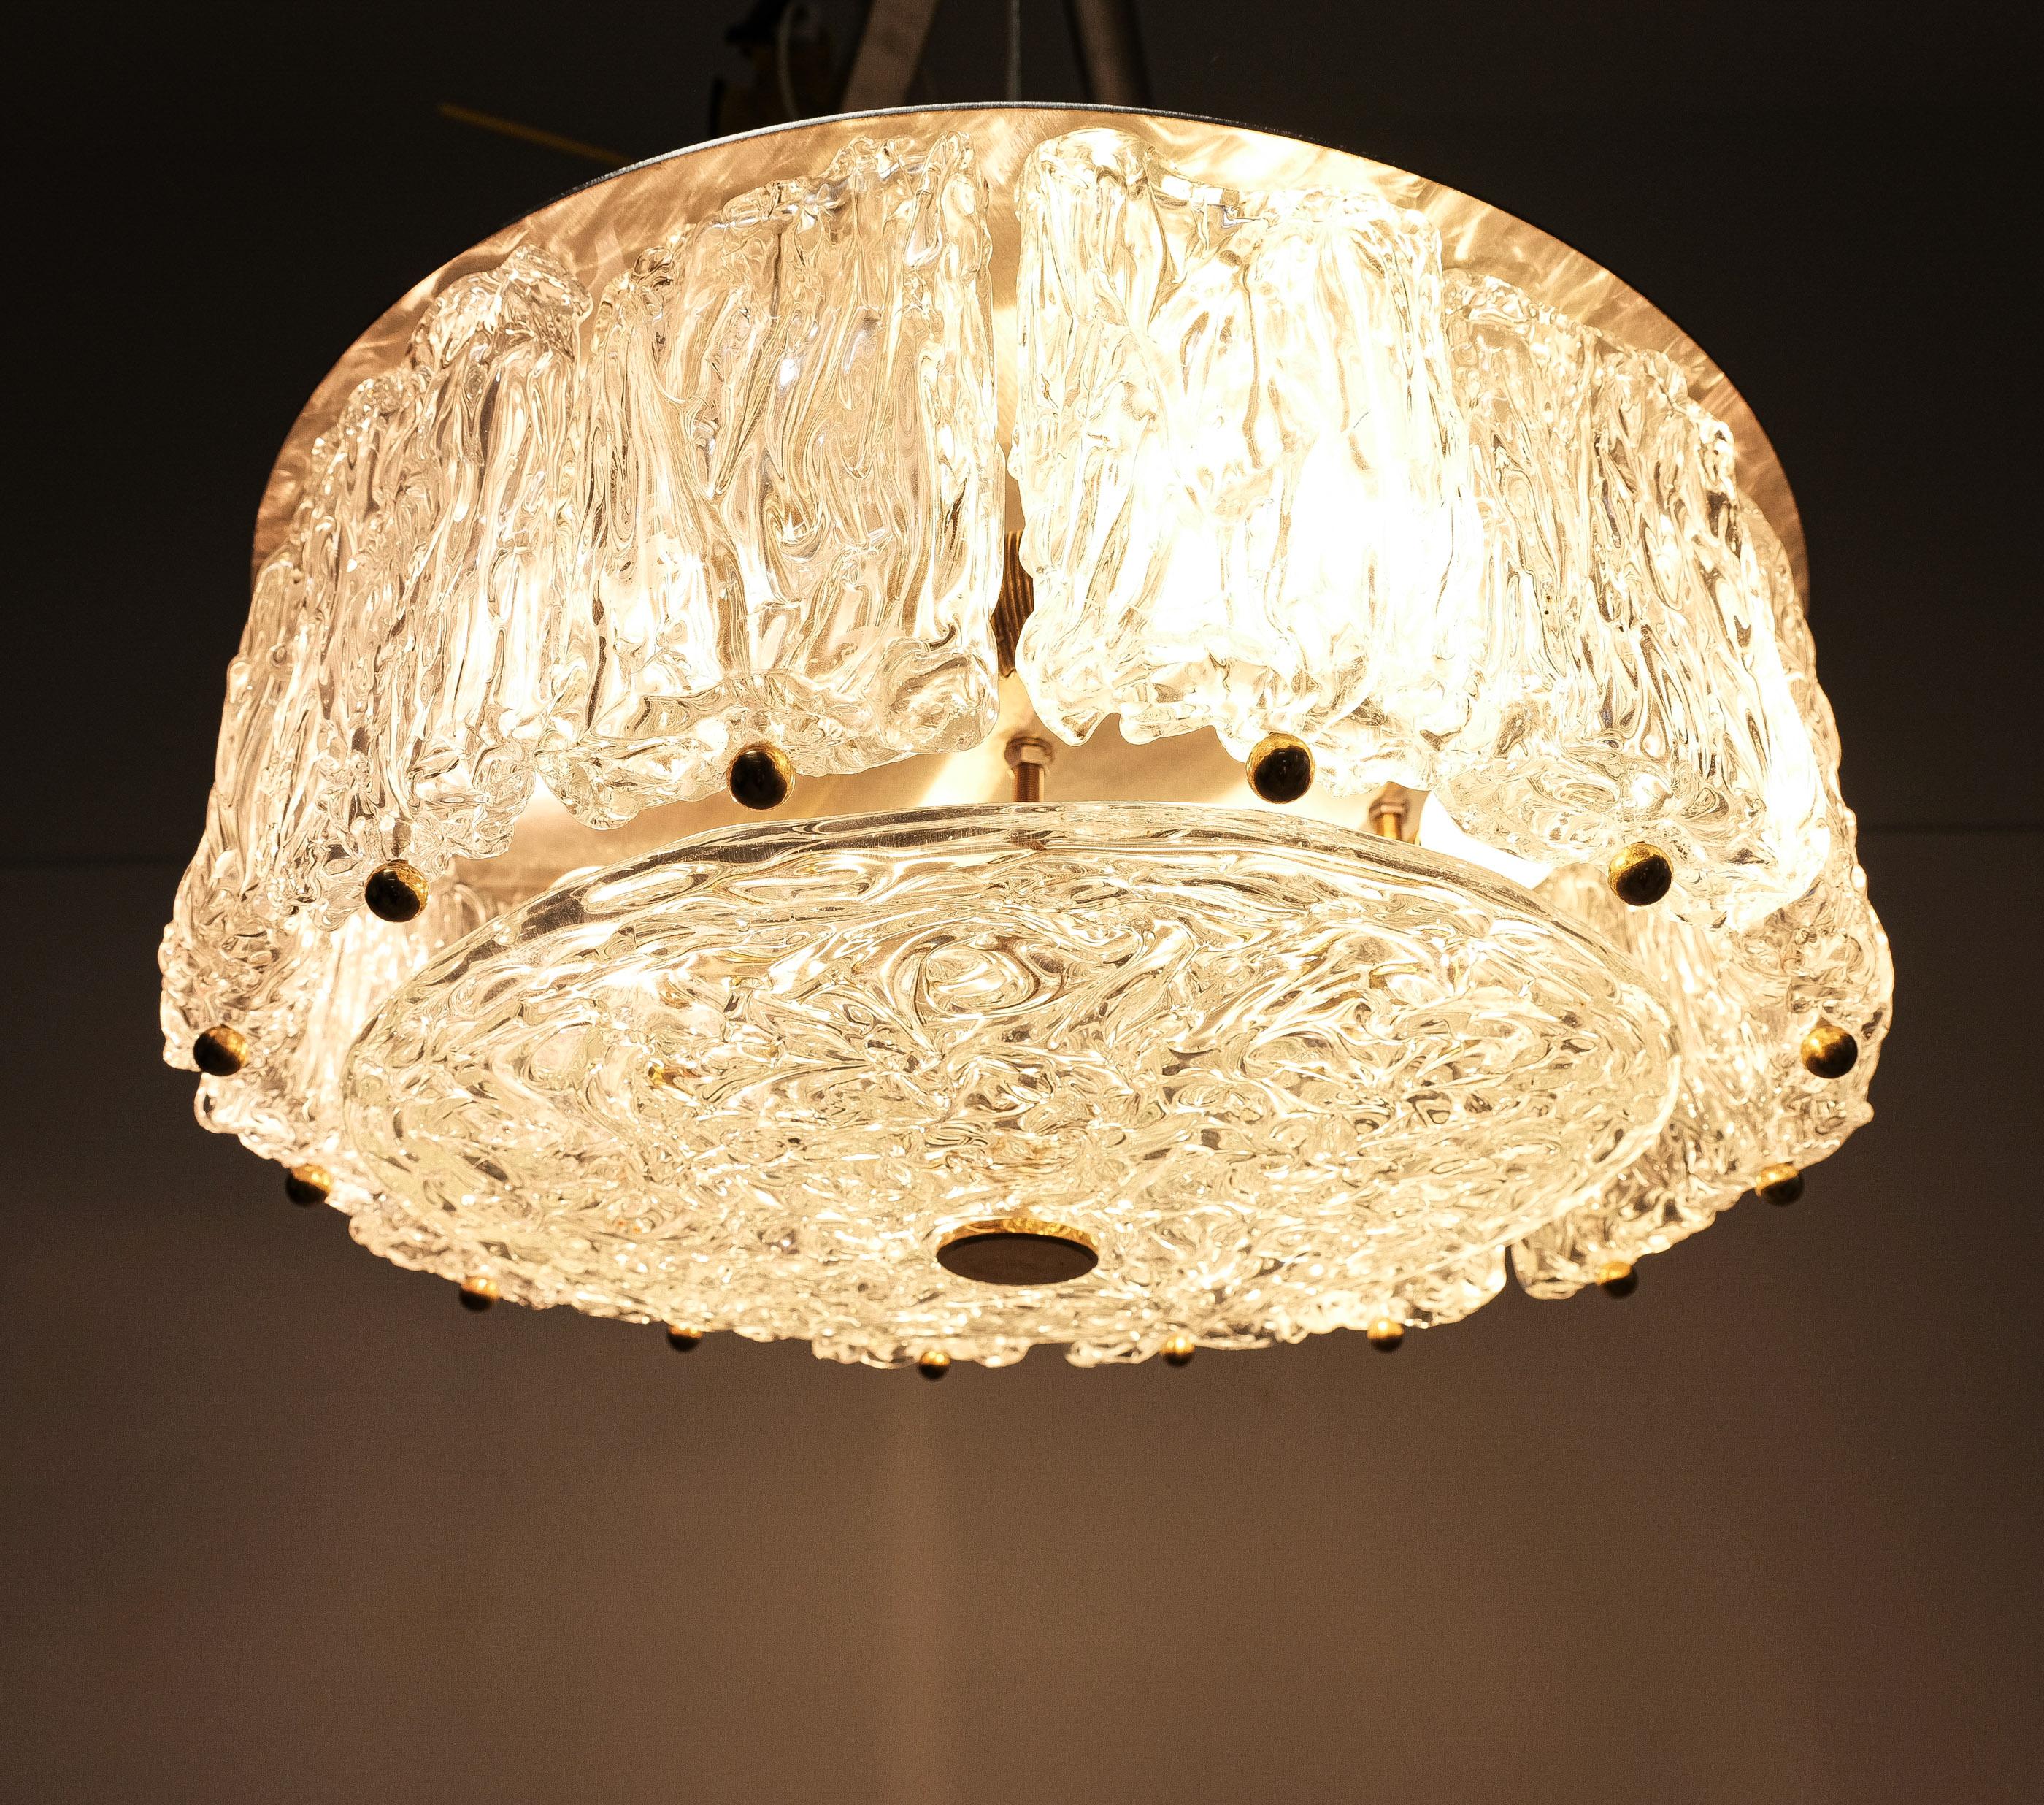 Flush mount from Barovier&Toso, Italy, circa 1950-1960.

Introducing a one-of-a-kind vintage Barovier Toso flush mount! This stunning light fixture is the perfect addition to any home looking for a touch of elegance and timeless